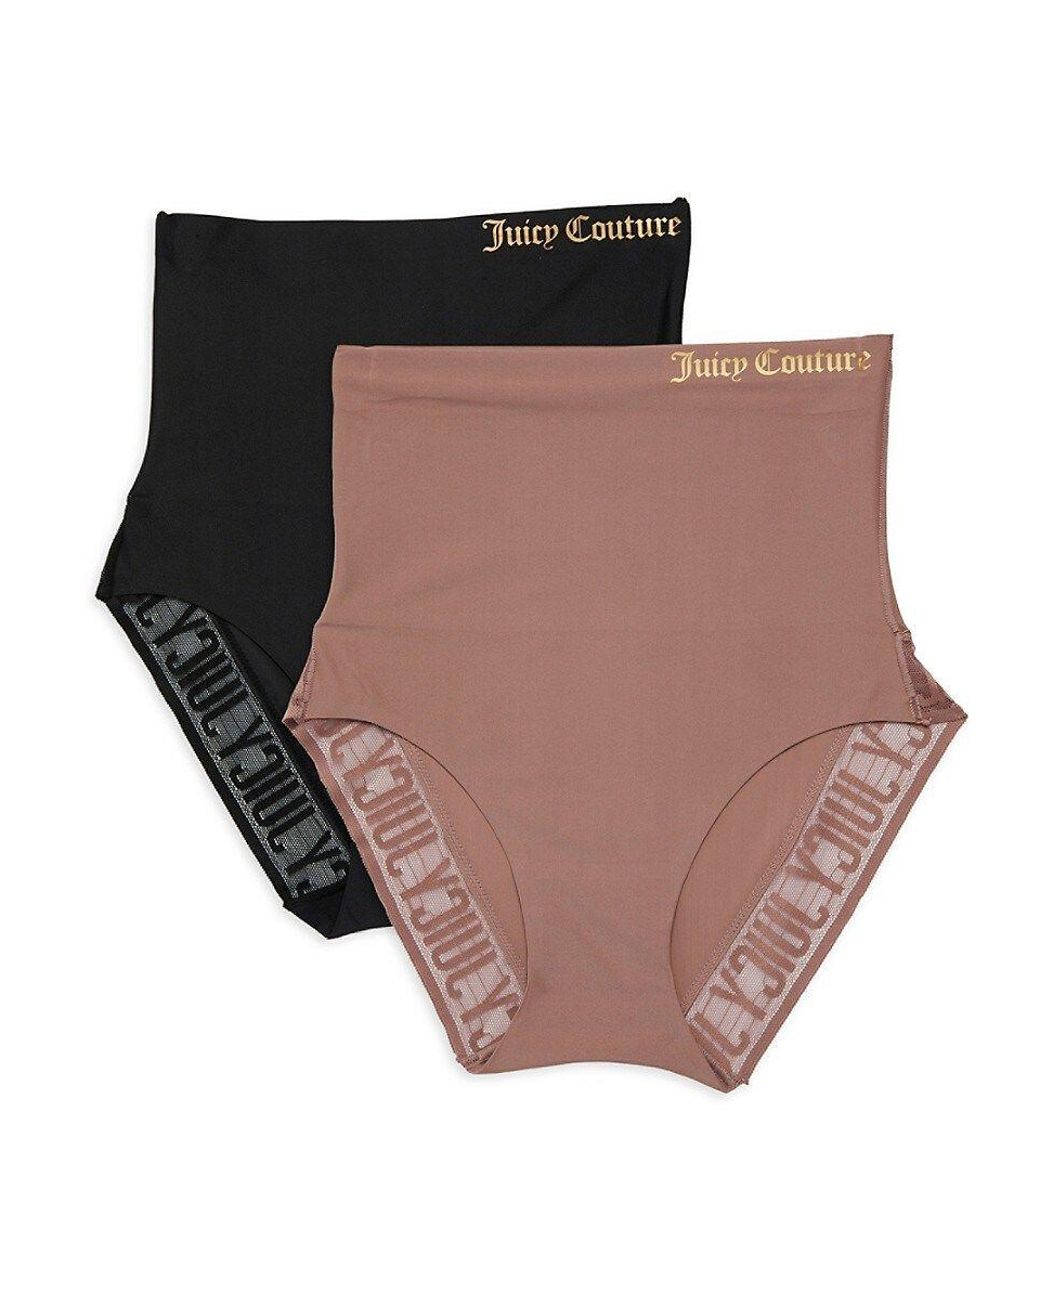 Juicy Couture Women Briefs Shaping Seamless 3X Black Grey Shapewear NEW